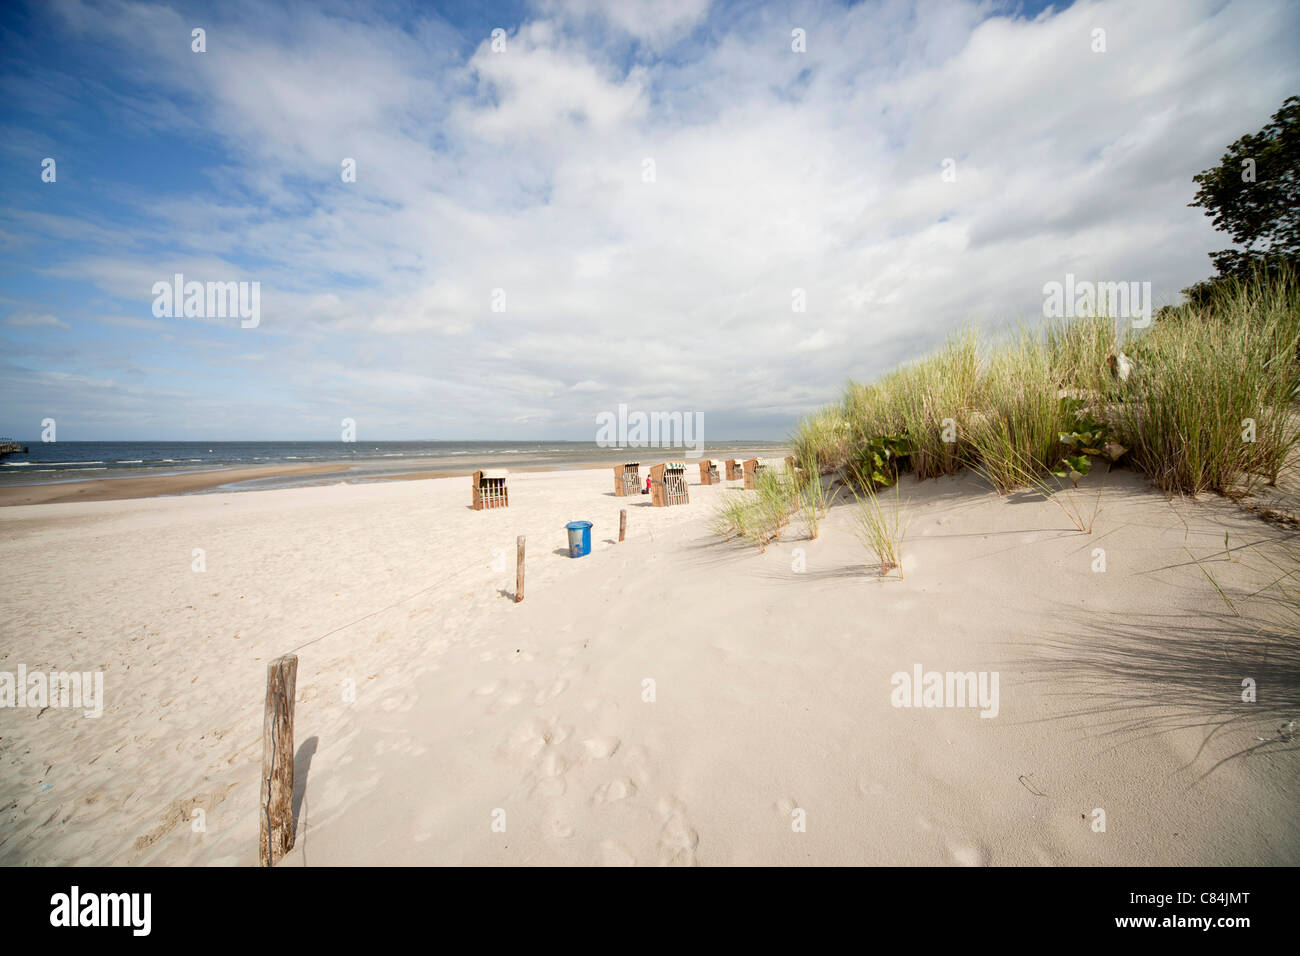 Beach chairs ' Strandkorb ' and the baltic beach of the coastal resort of Lubmin, Mecklenburg-Vorpommern, Germany Stock Photo